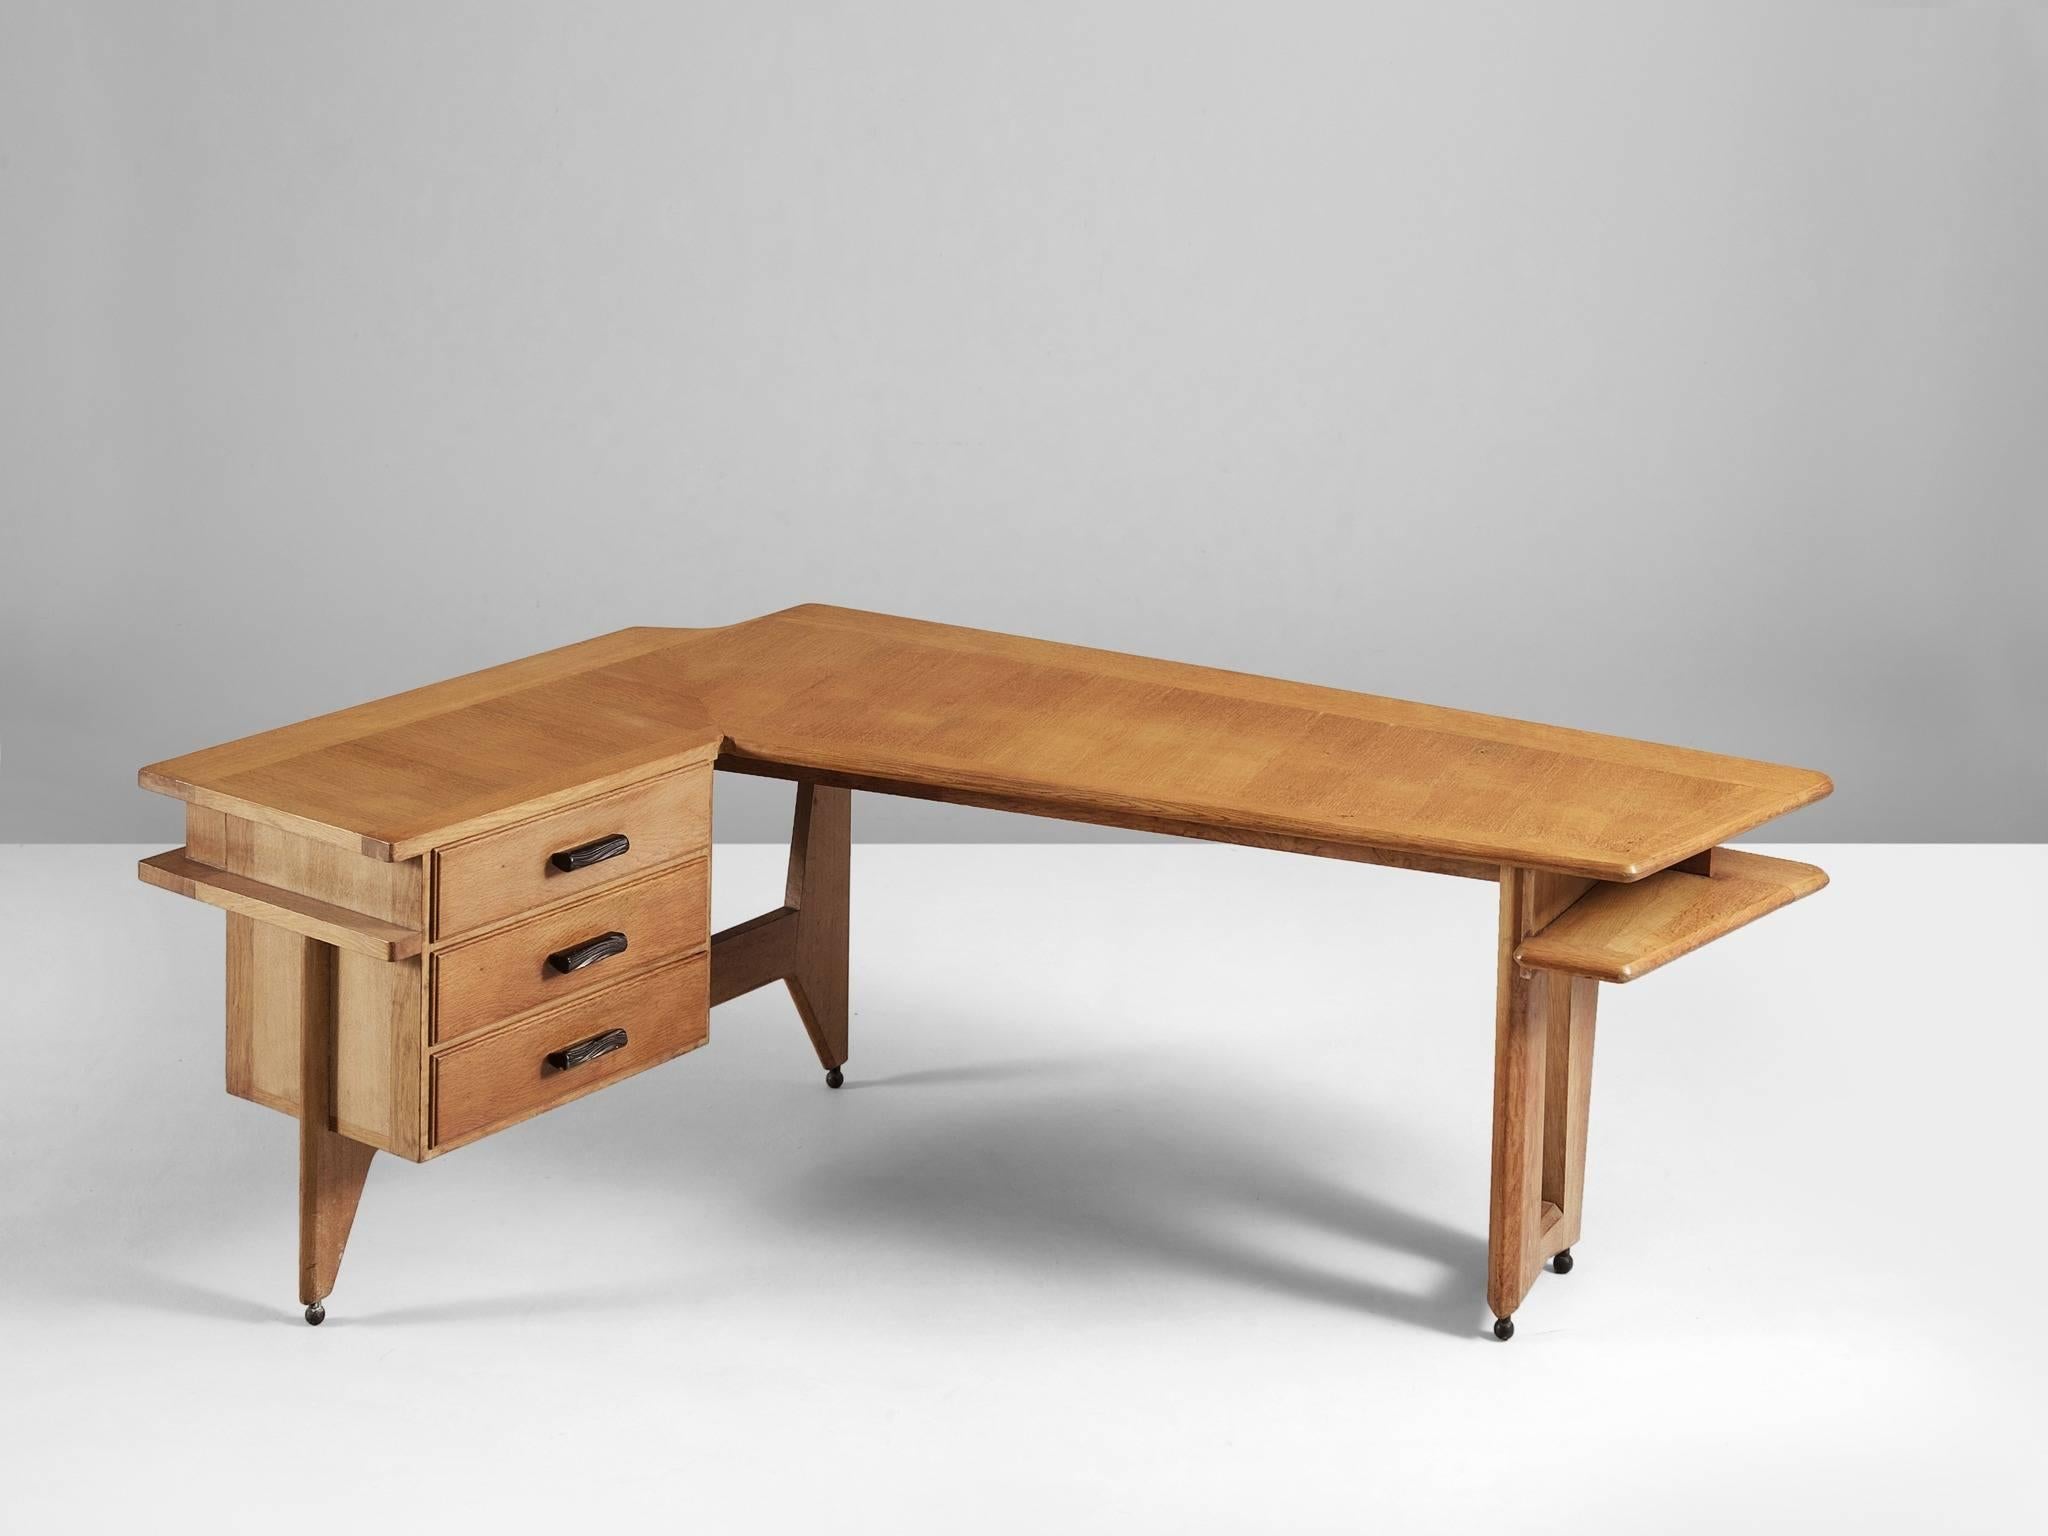 Desk, in oak, by Guillerme & Chambron, France, 1960s.

Desk & return in solid oak by French designers Guillerme et Chambron. This elegant corner desk shows interesting details. First there is the shaped of the top, which is L-shaped. There is